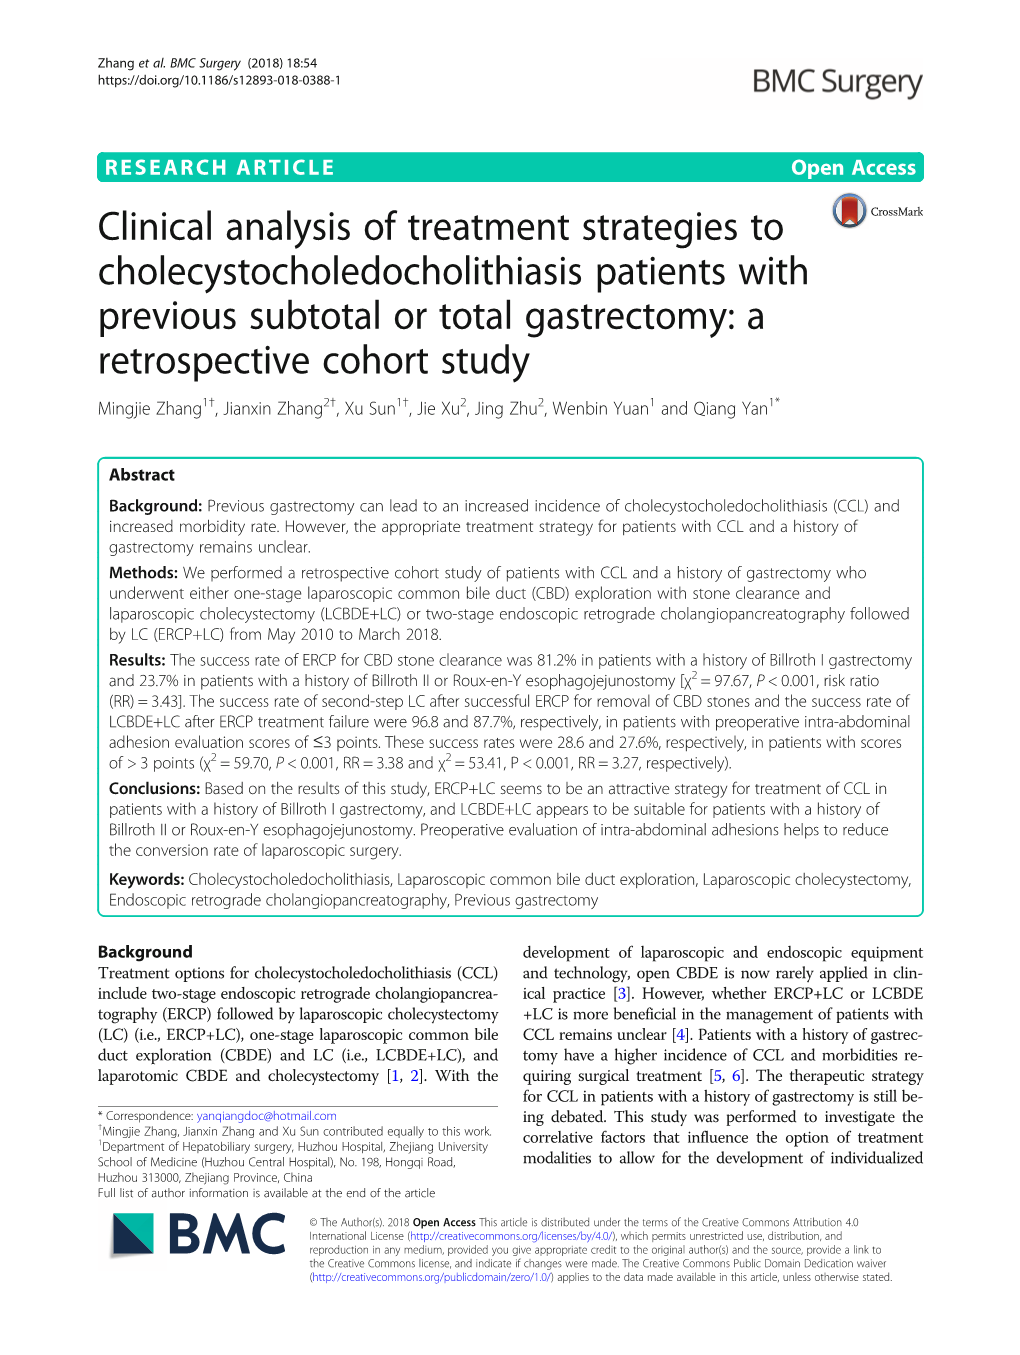 Clinical Analysis of Treatment Strategies To